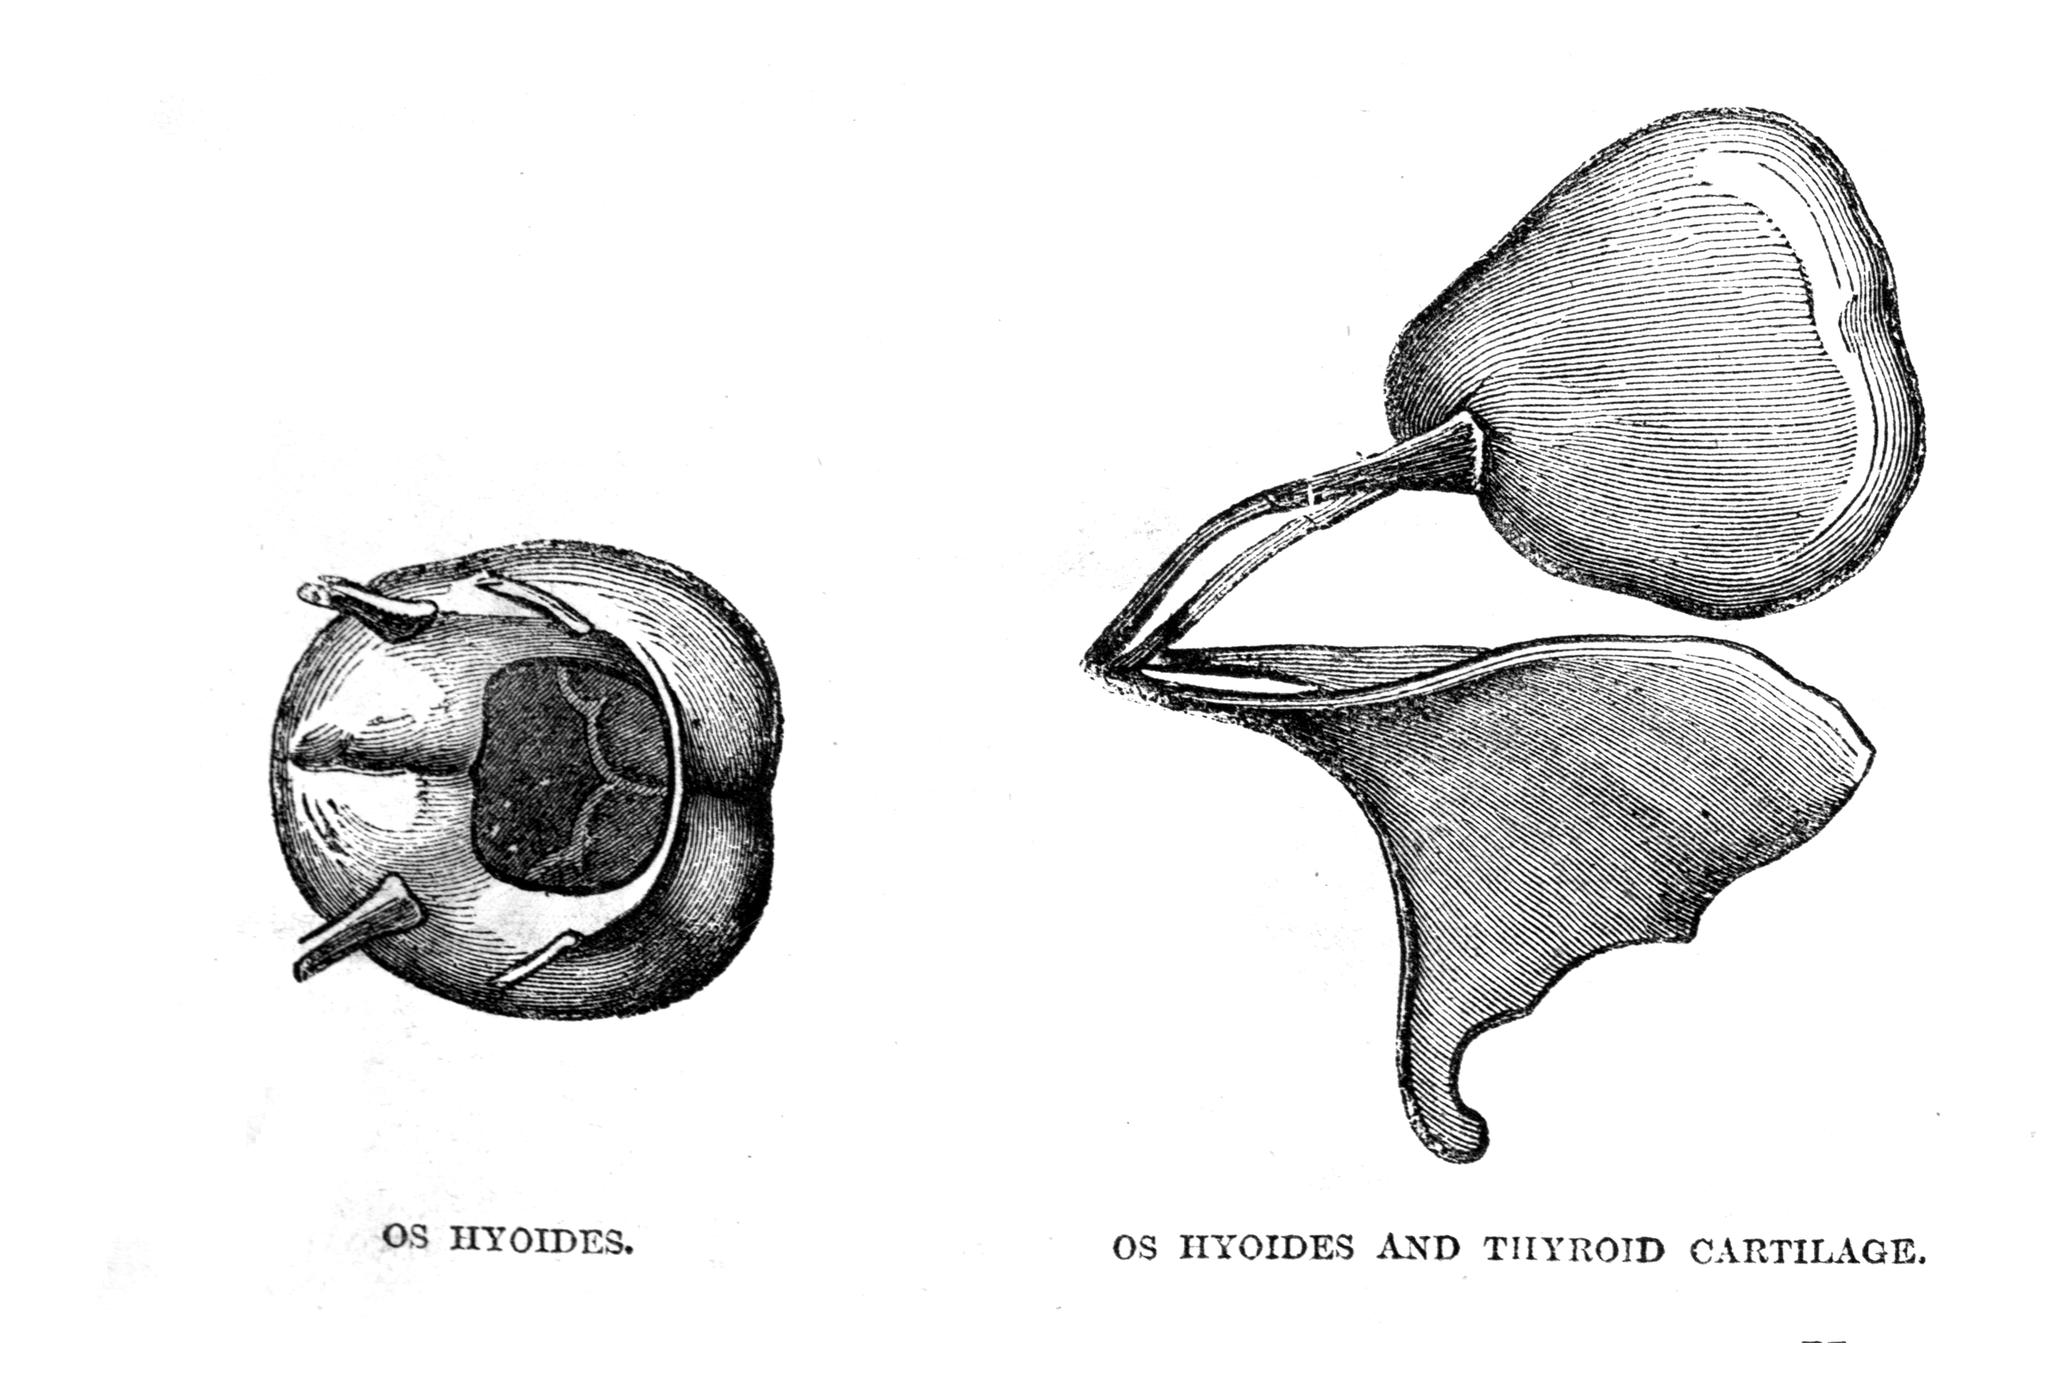 Os Hyoides and Os Hyoides and Thyroid Cartilage